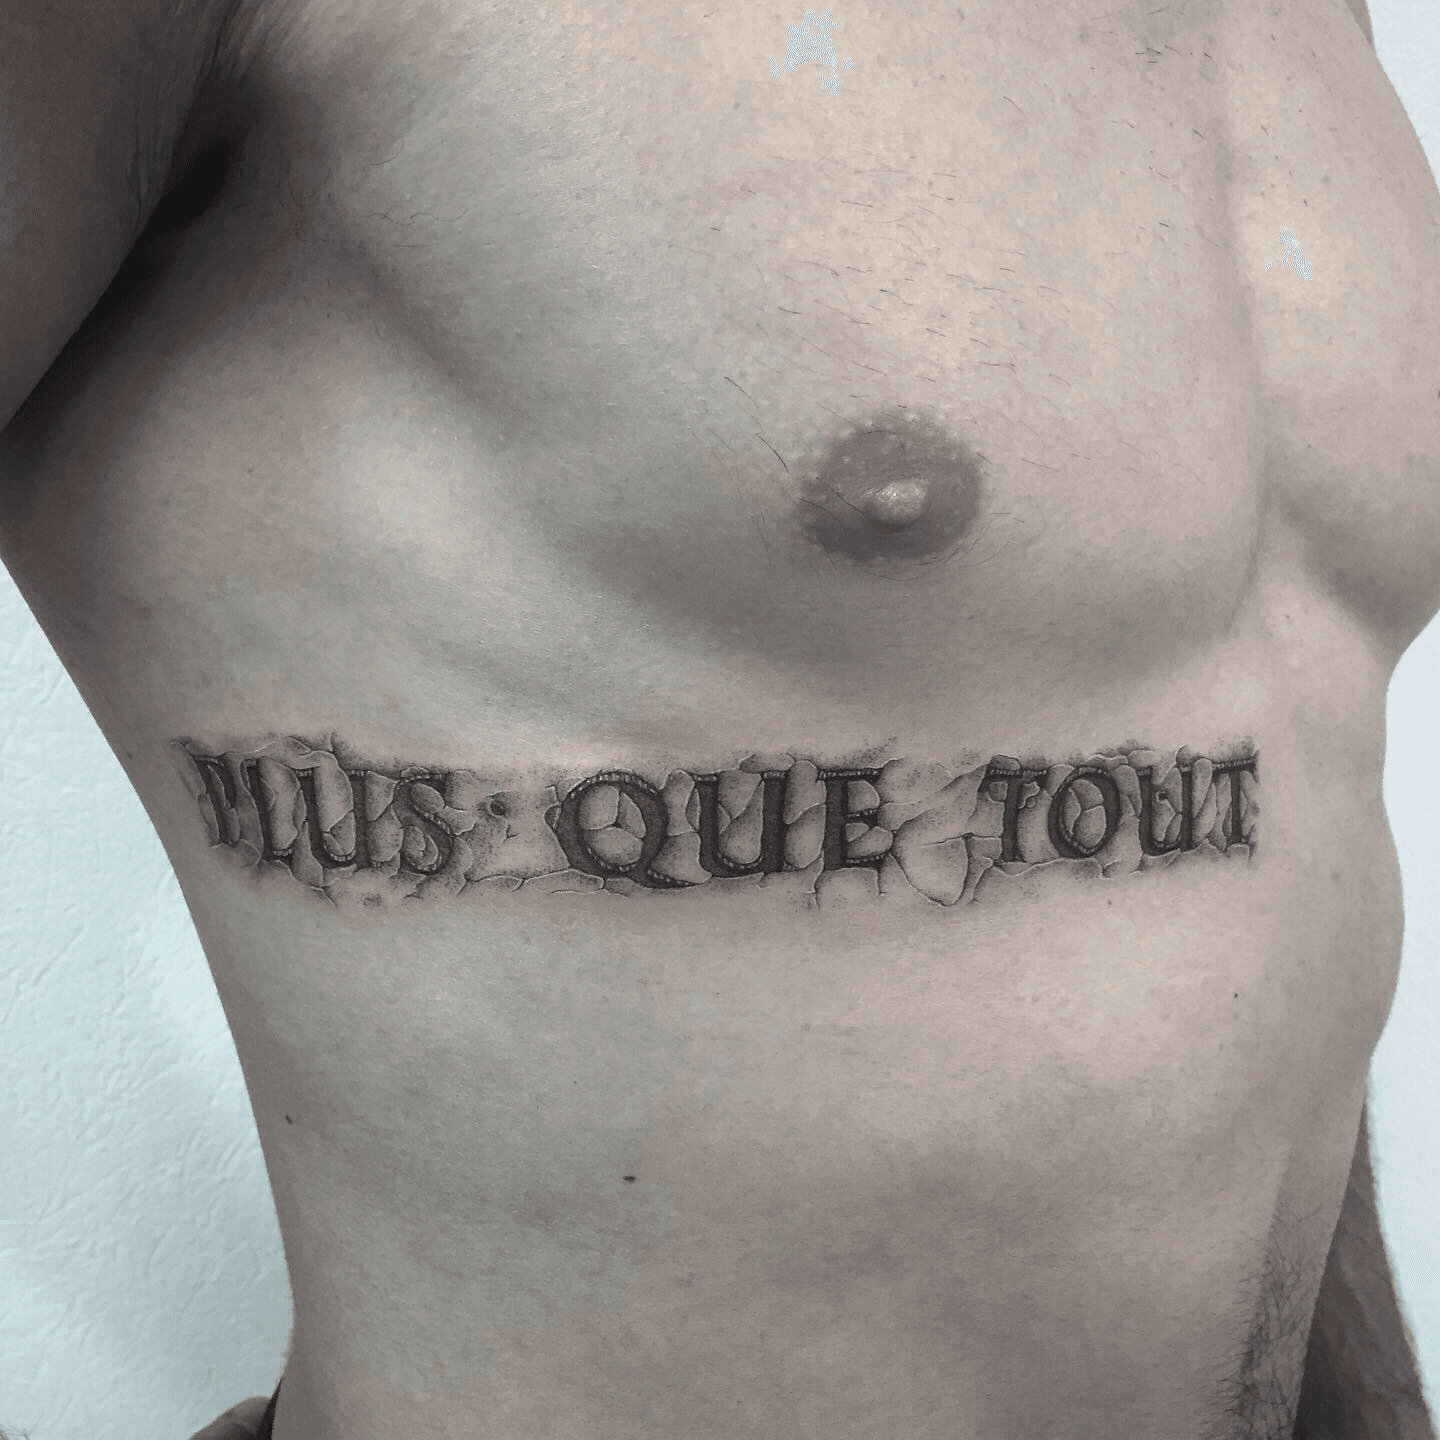 Details more than 64 3d stone tattoo best  thtantai2